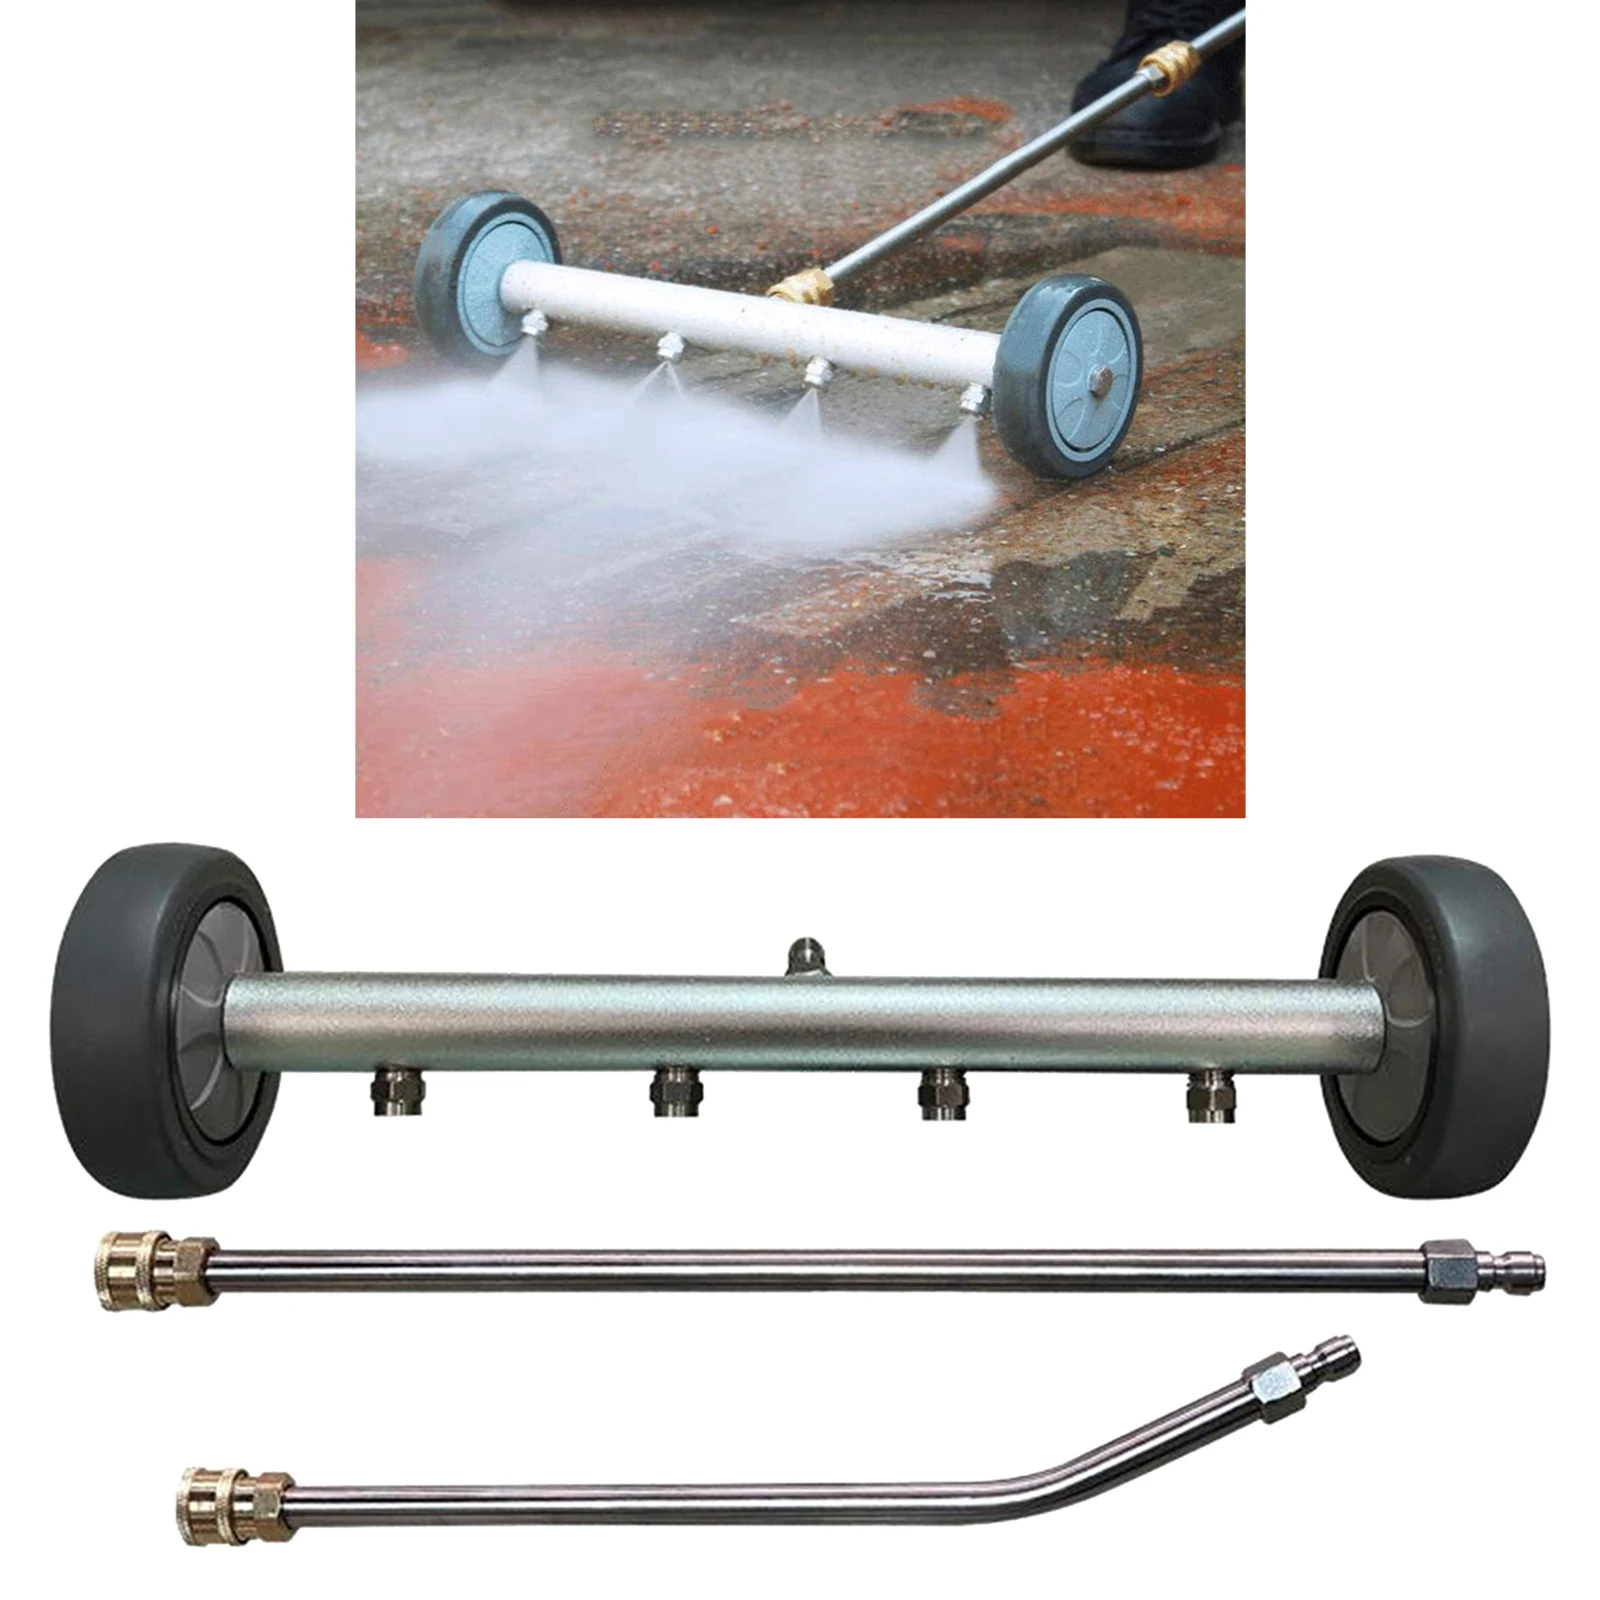 Pressure Washer Undercarriage Cleaner Under Car Water Broom with Extension Wand